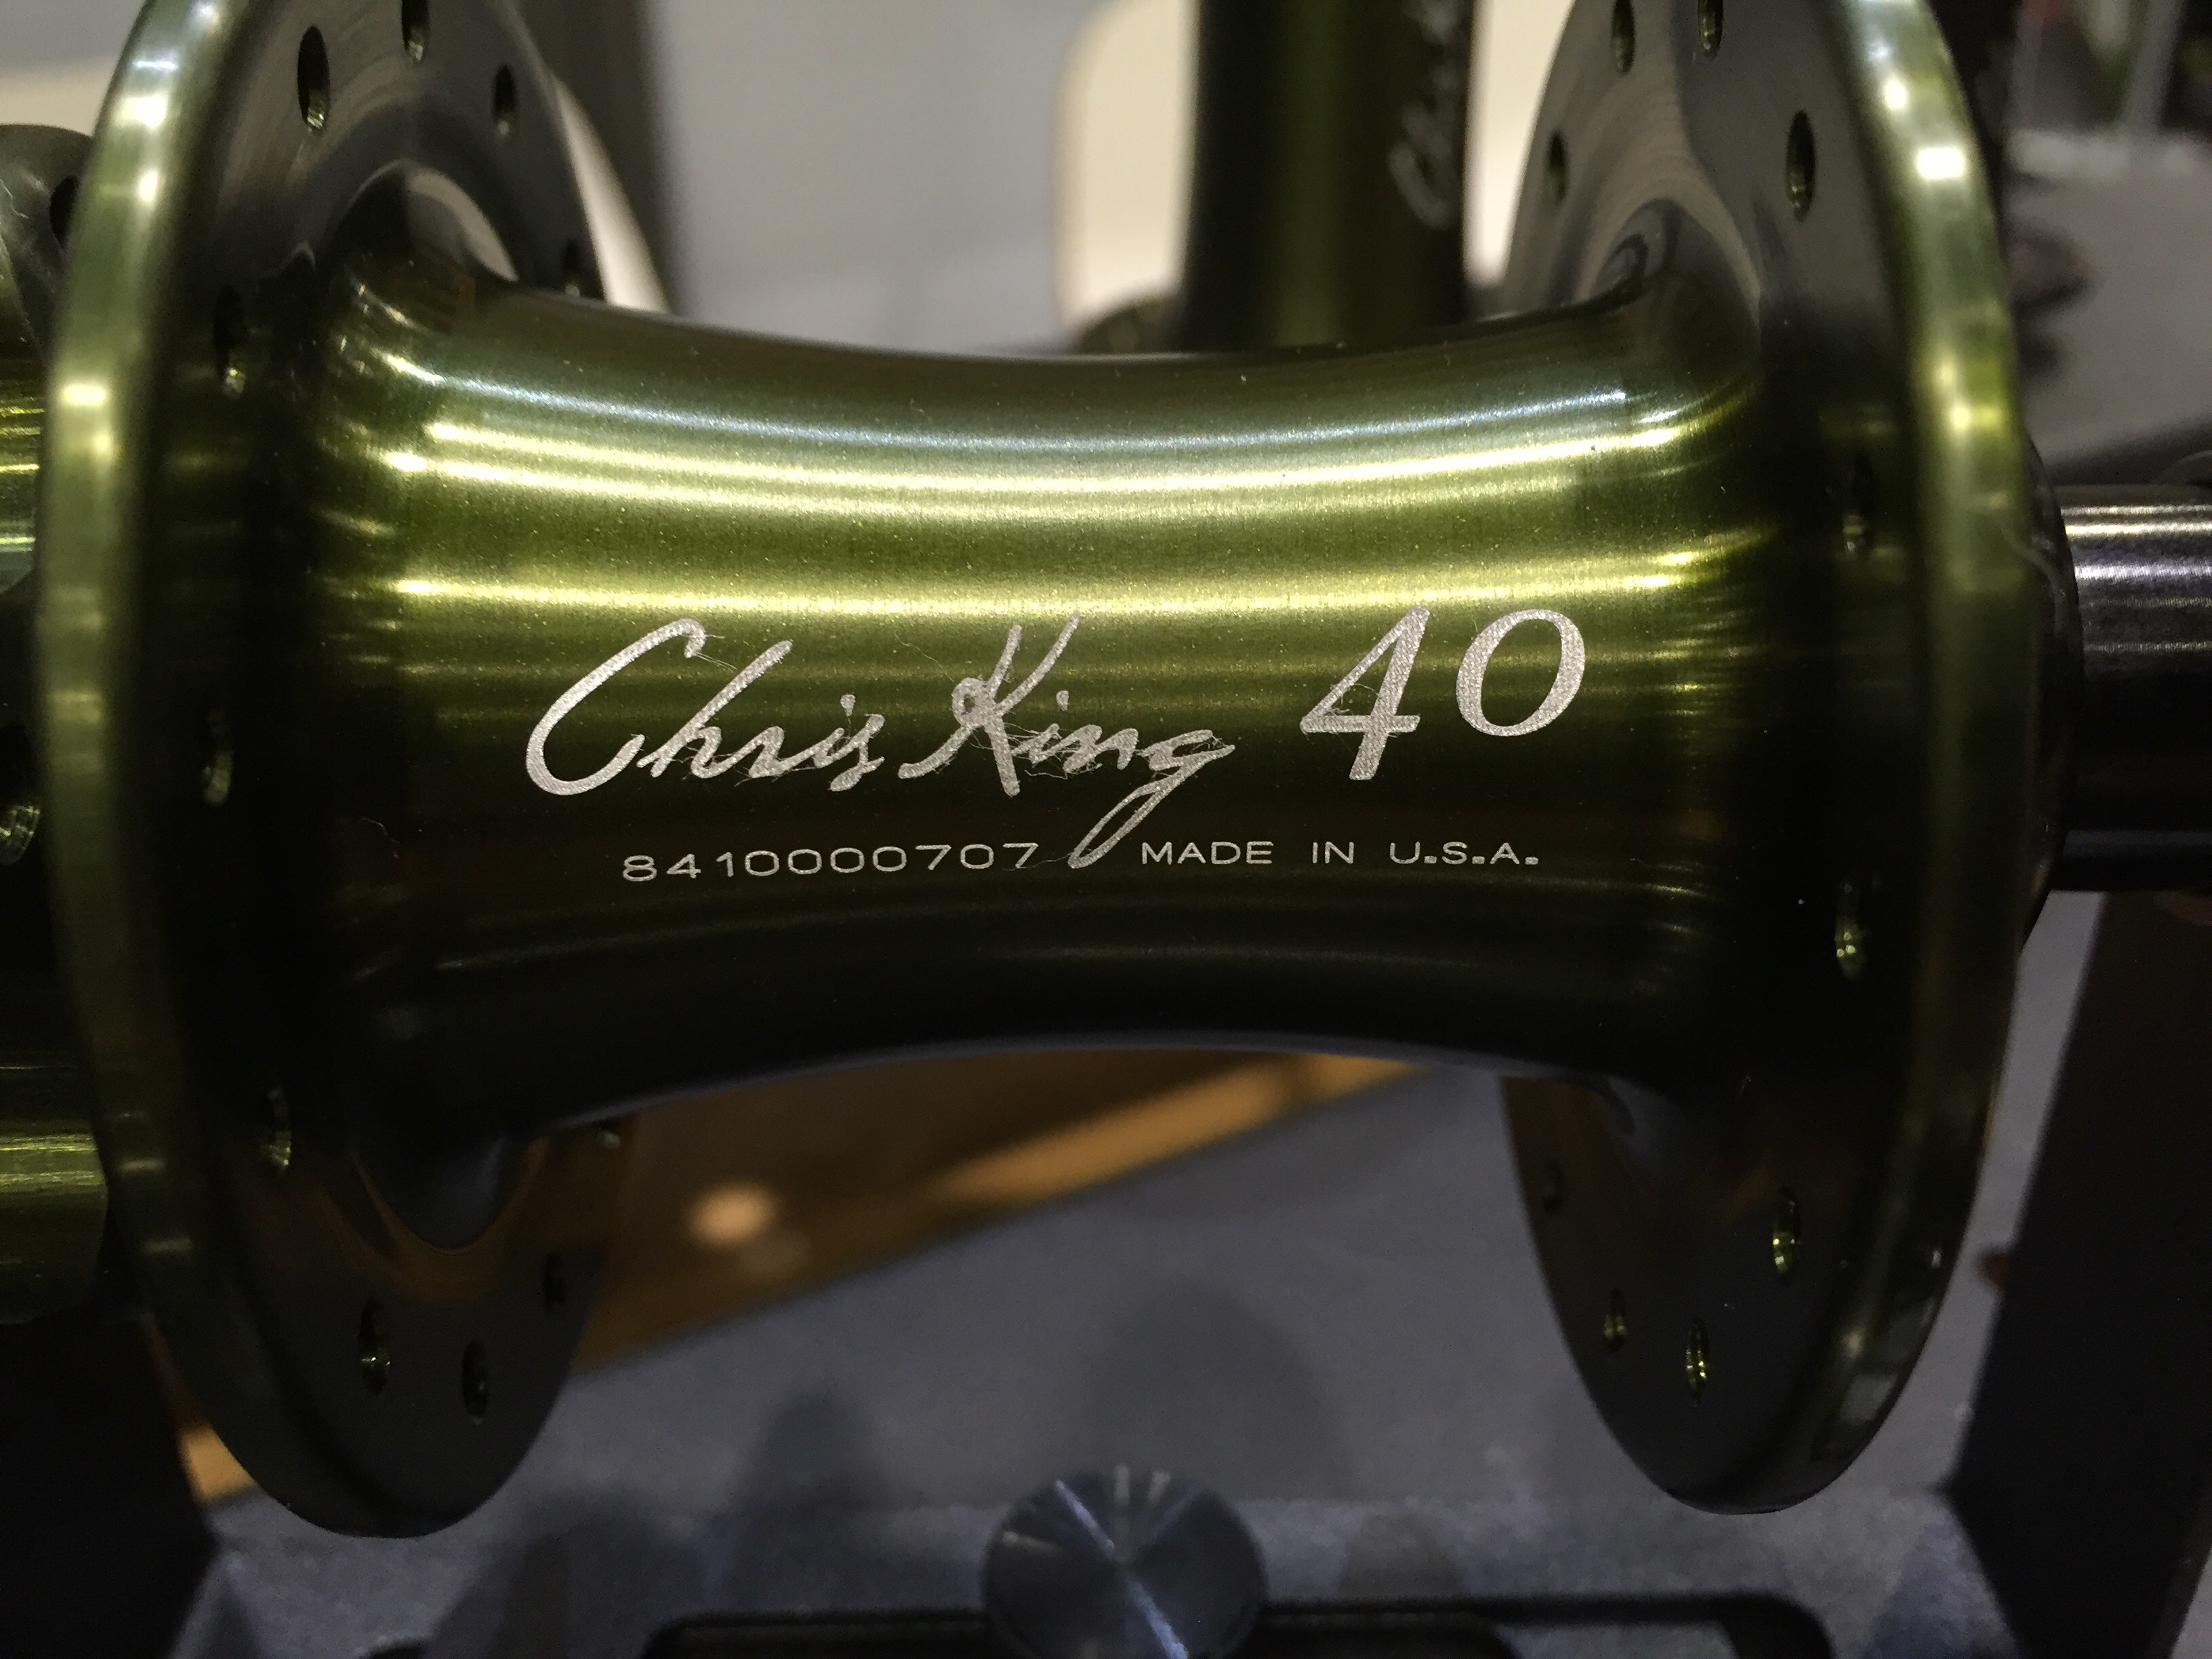 A week in Review: NAHBS!!! New stuff from Chris King, SRAM’s XC brakes, Frostbike unveilings & much more!